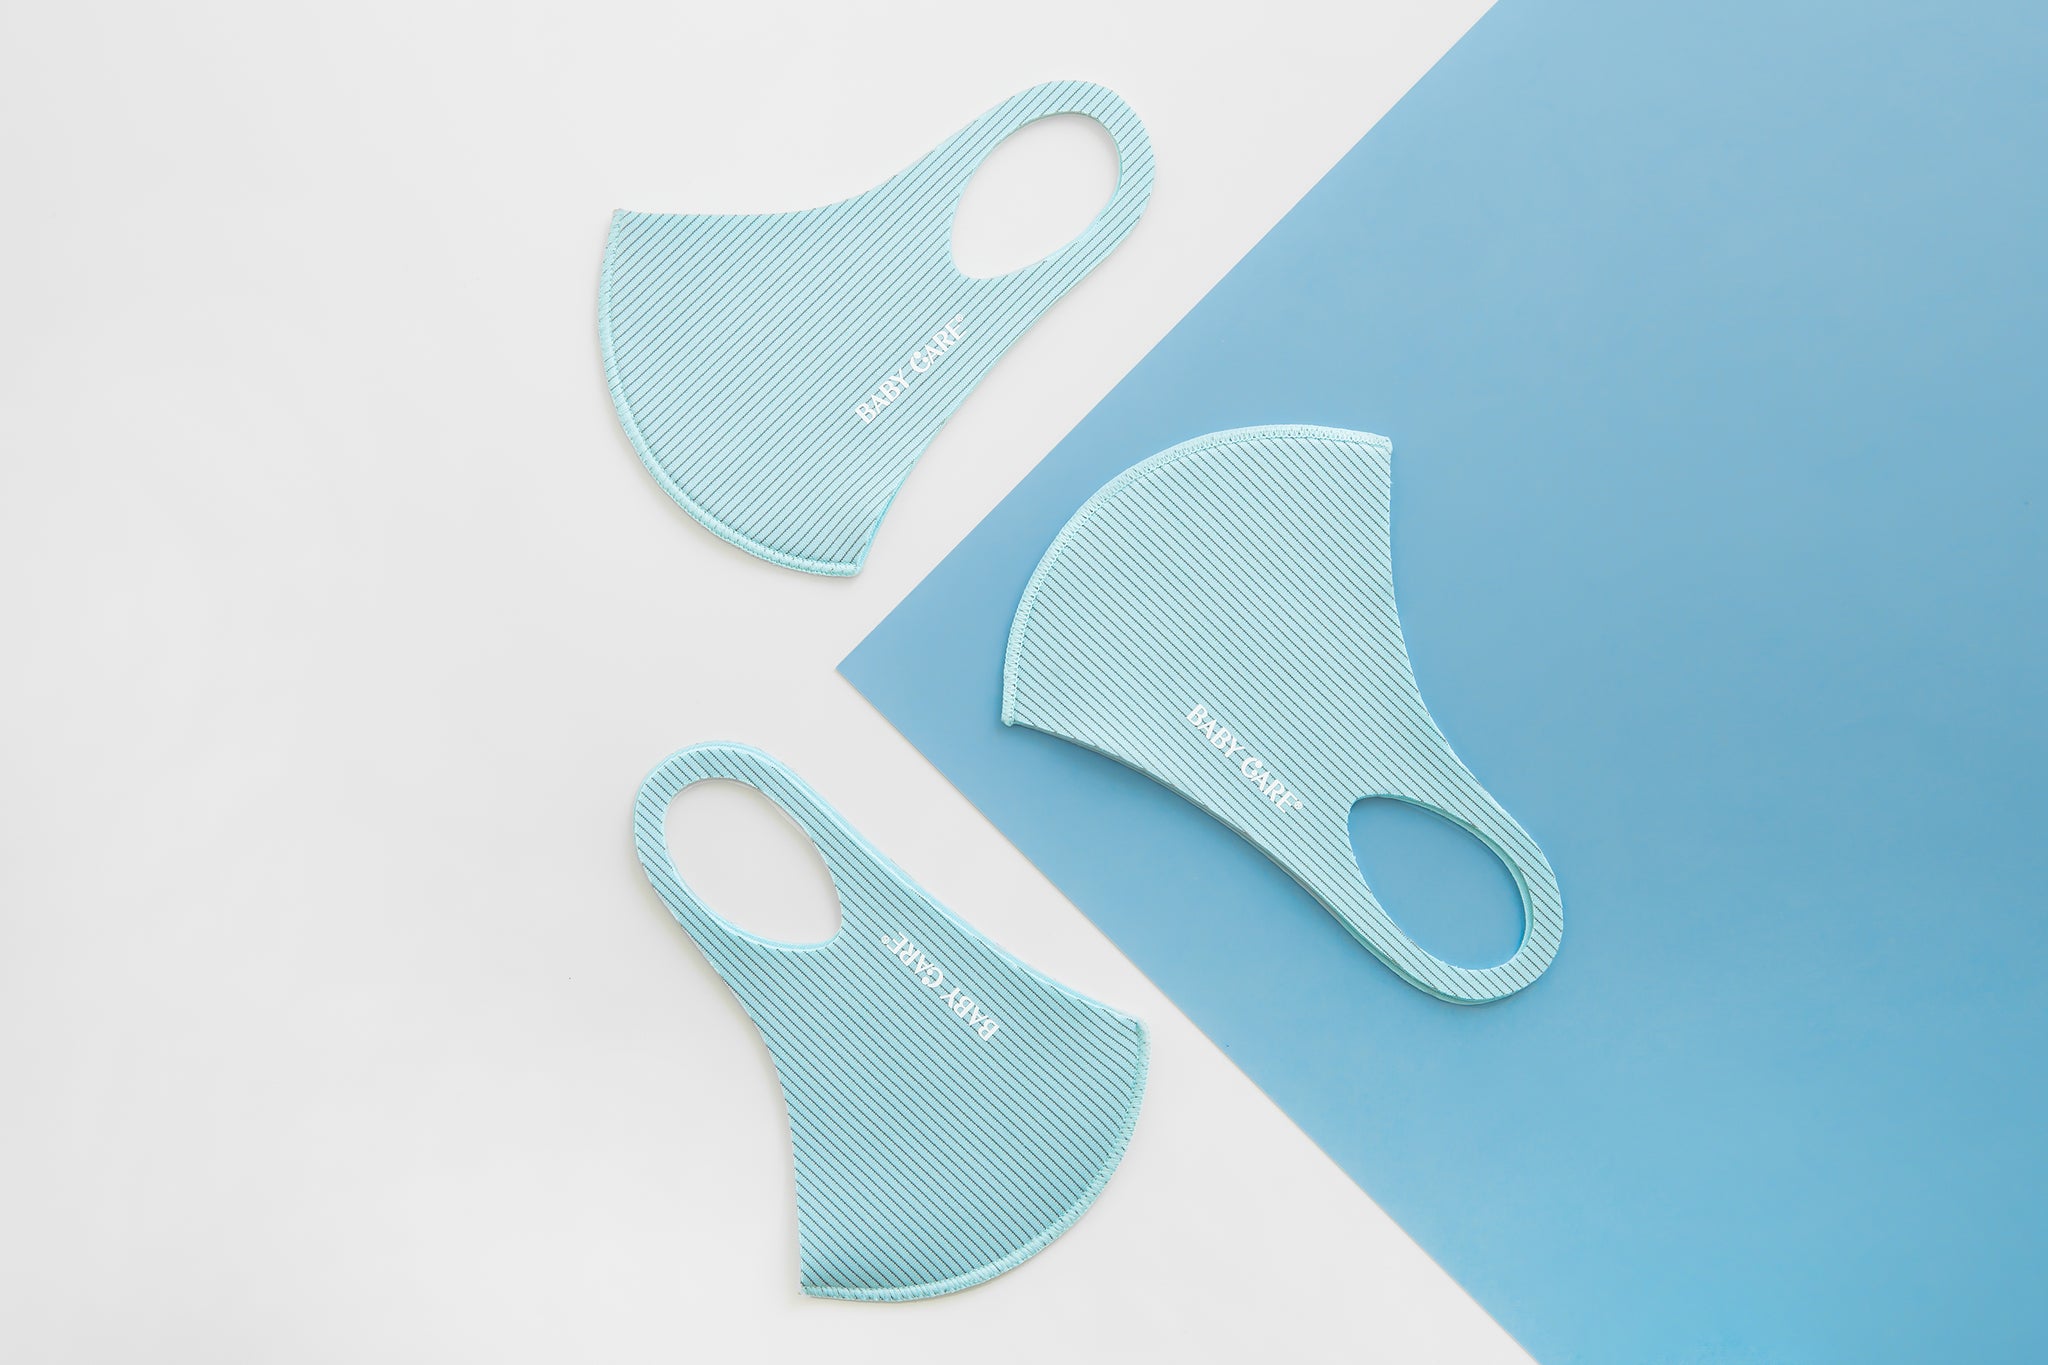 BABY CARE KIDS MASK _ Blue